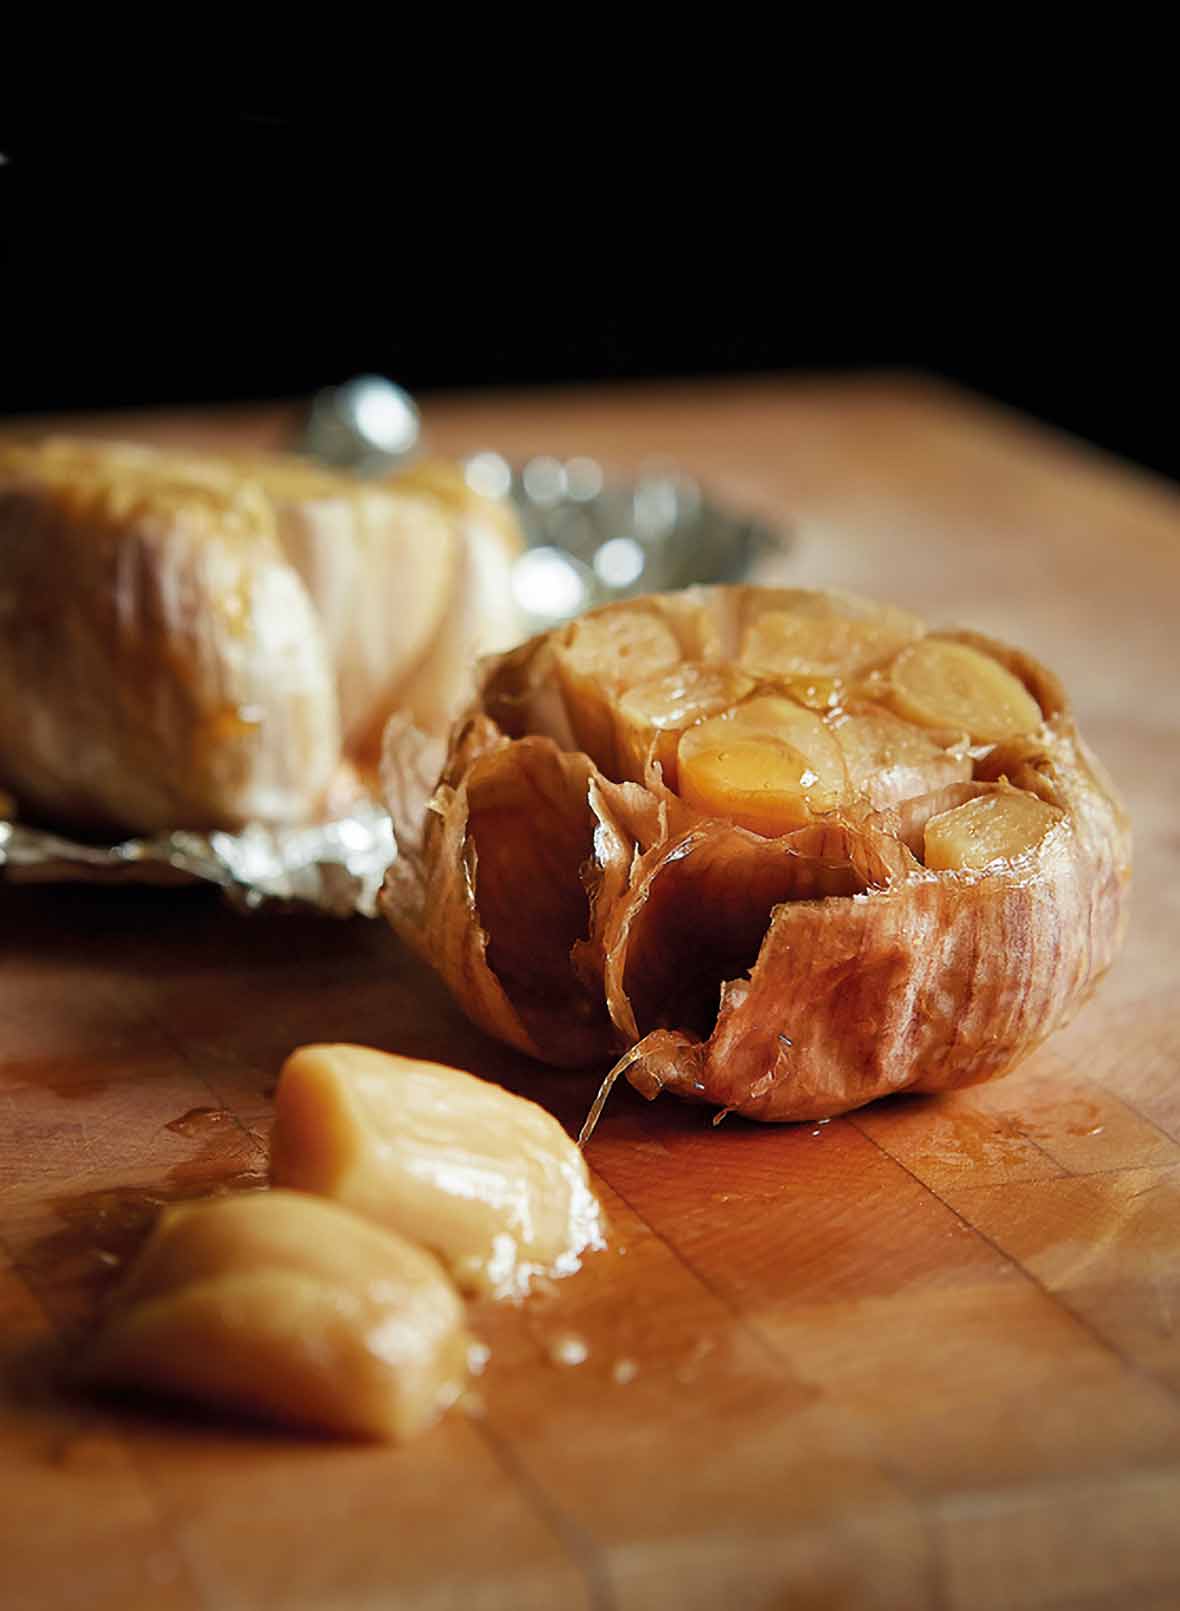 Two heads of roasted garlic--one in foil, one unwrapped--drizzled with oil on a cutting board.